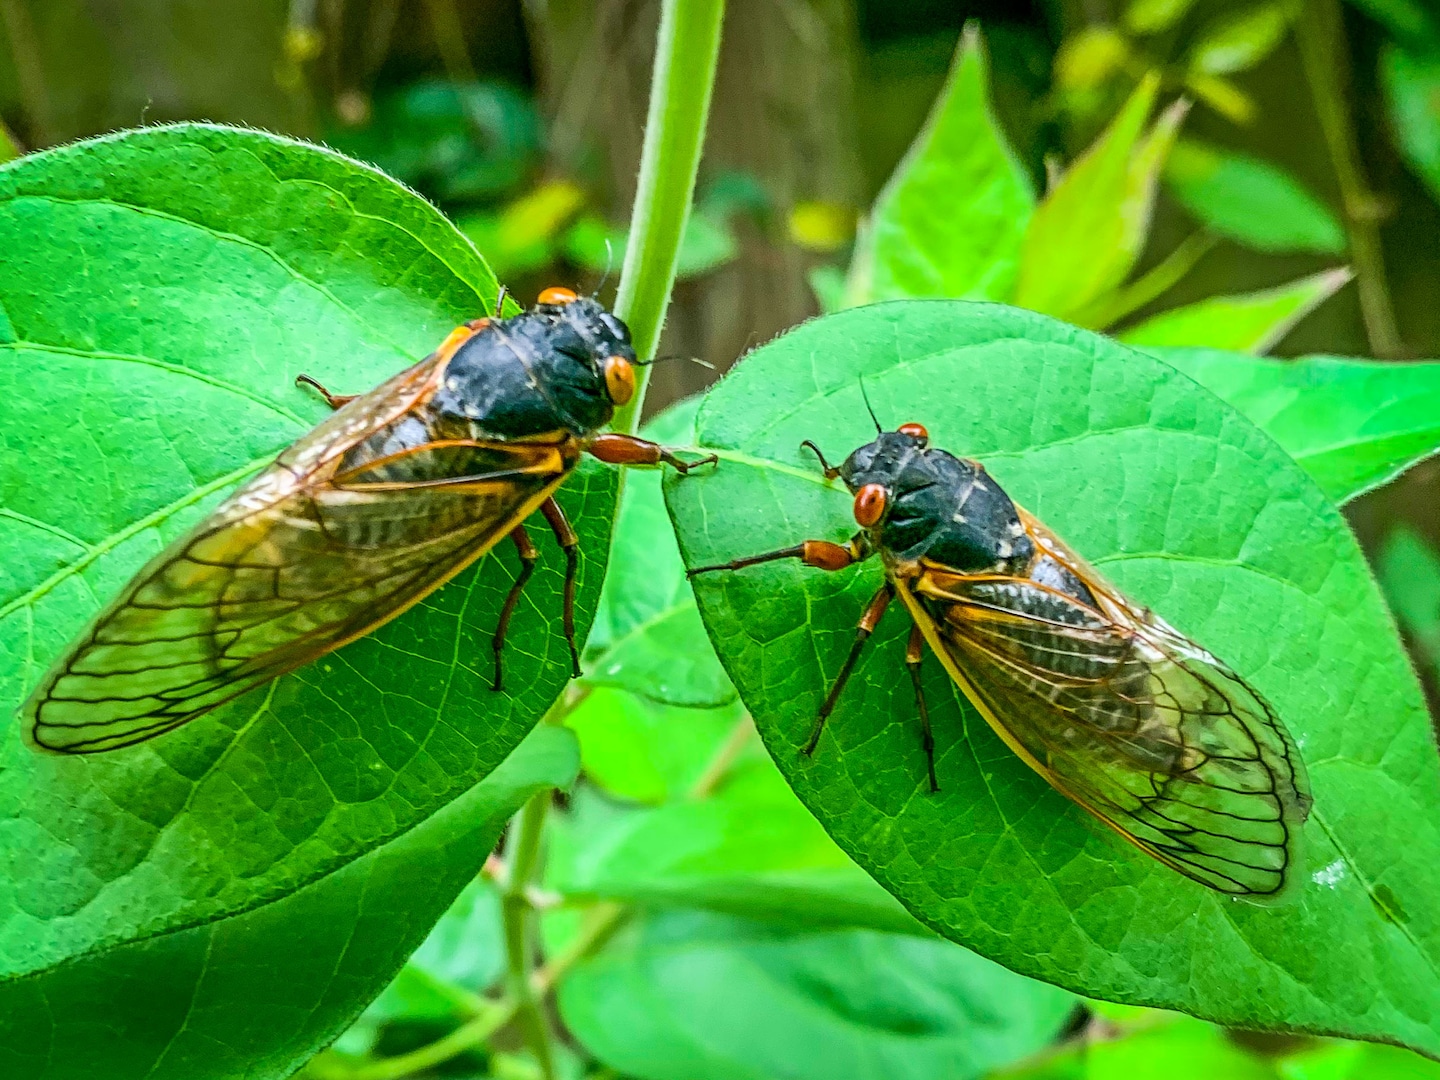 Cicadas are so loud that some South Carolina residents are calling police